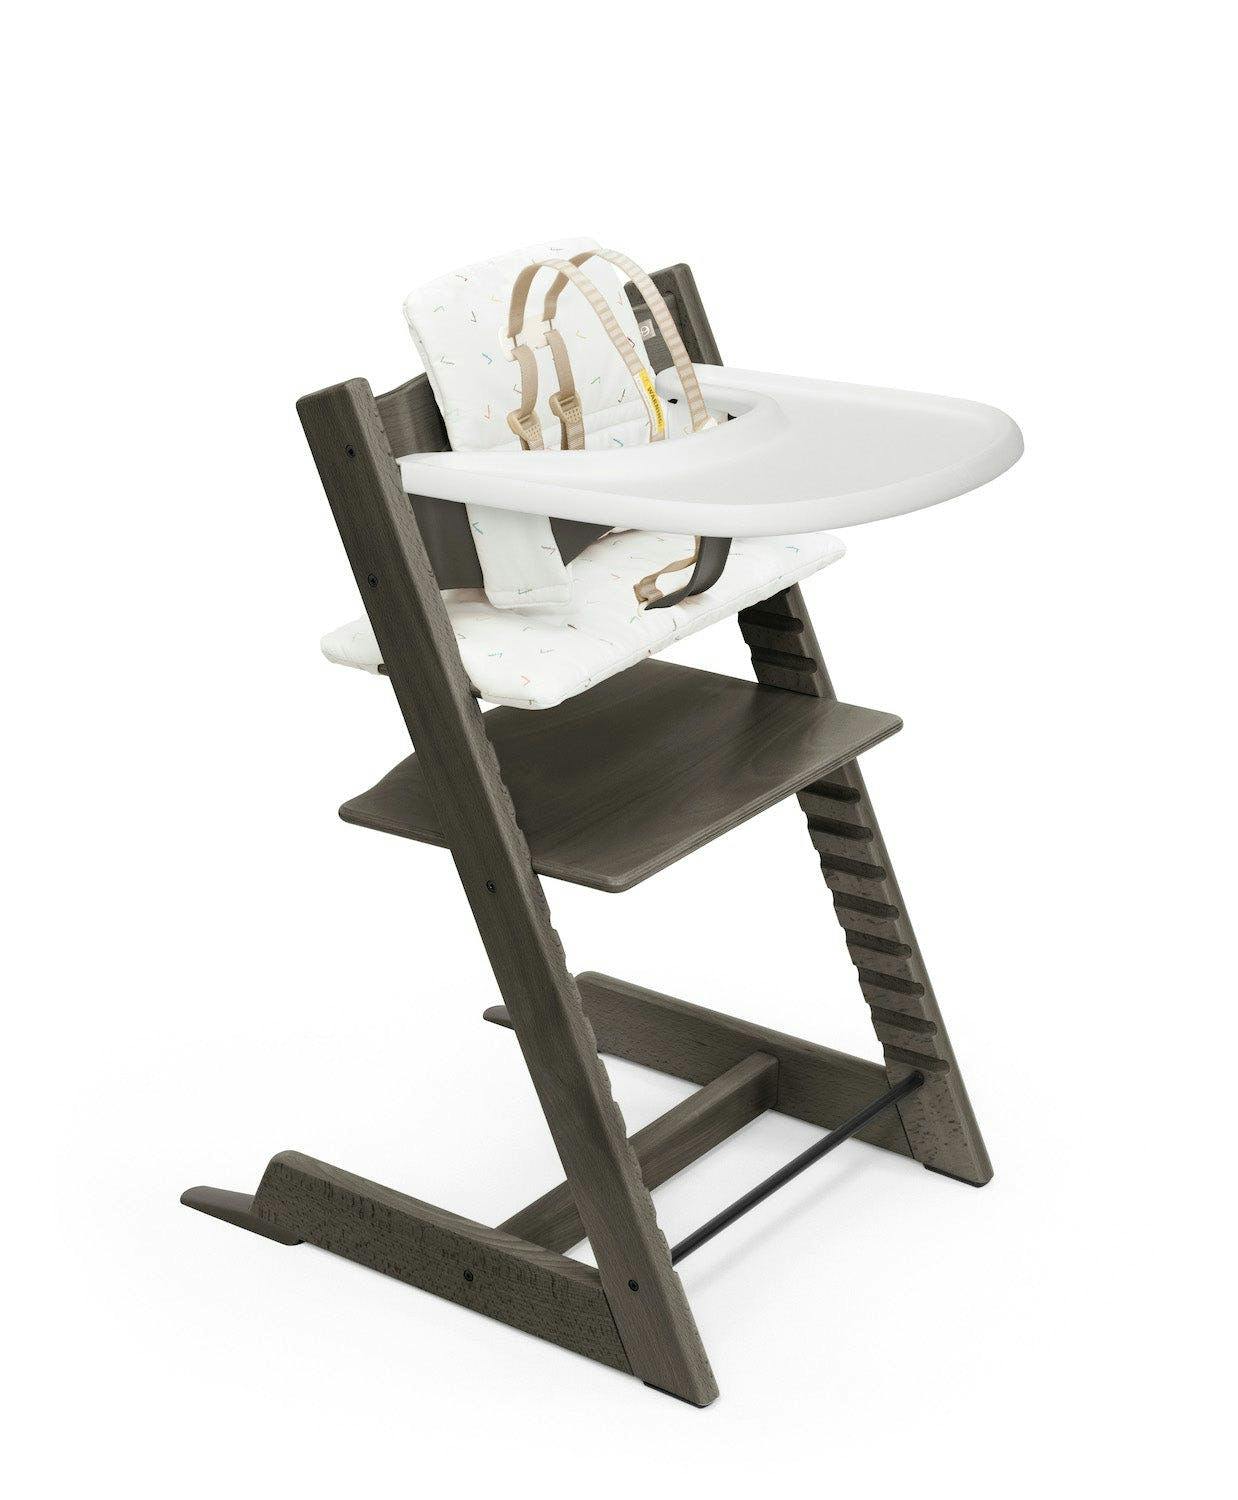 Stokke Tripp Trapp® High Chair Complete Bundle